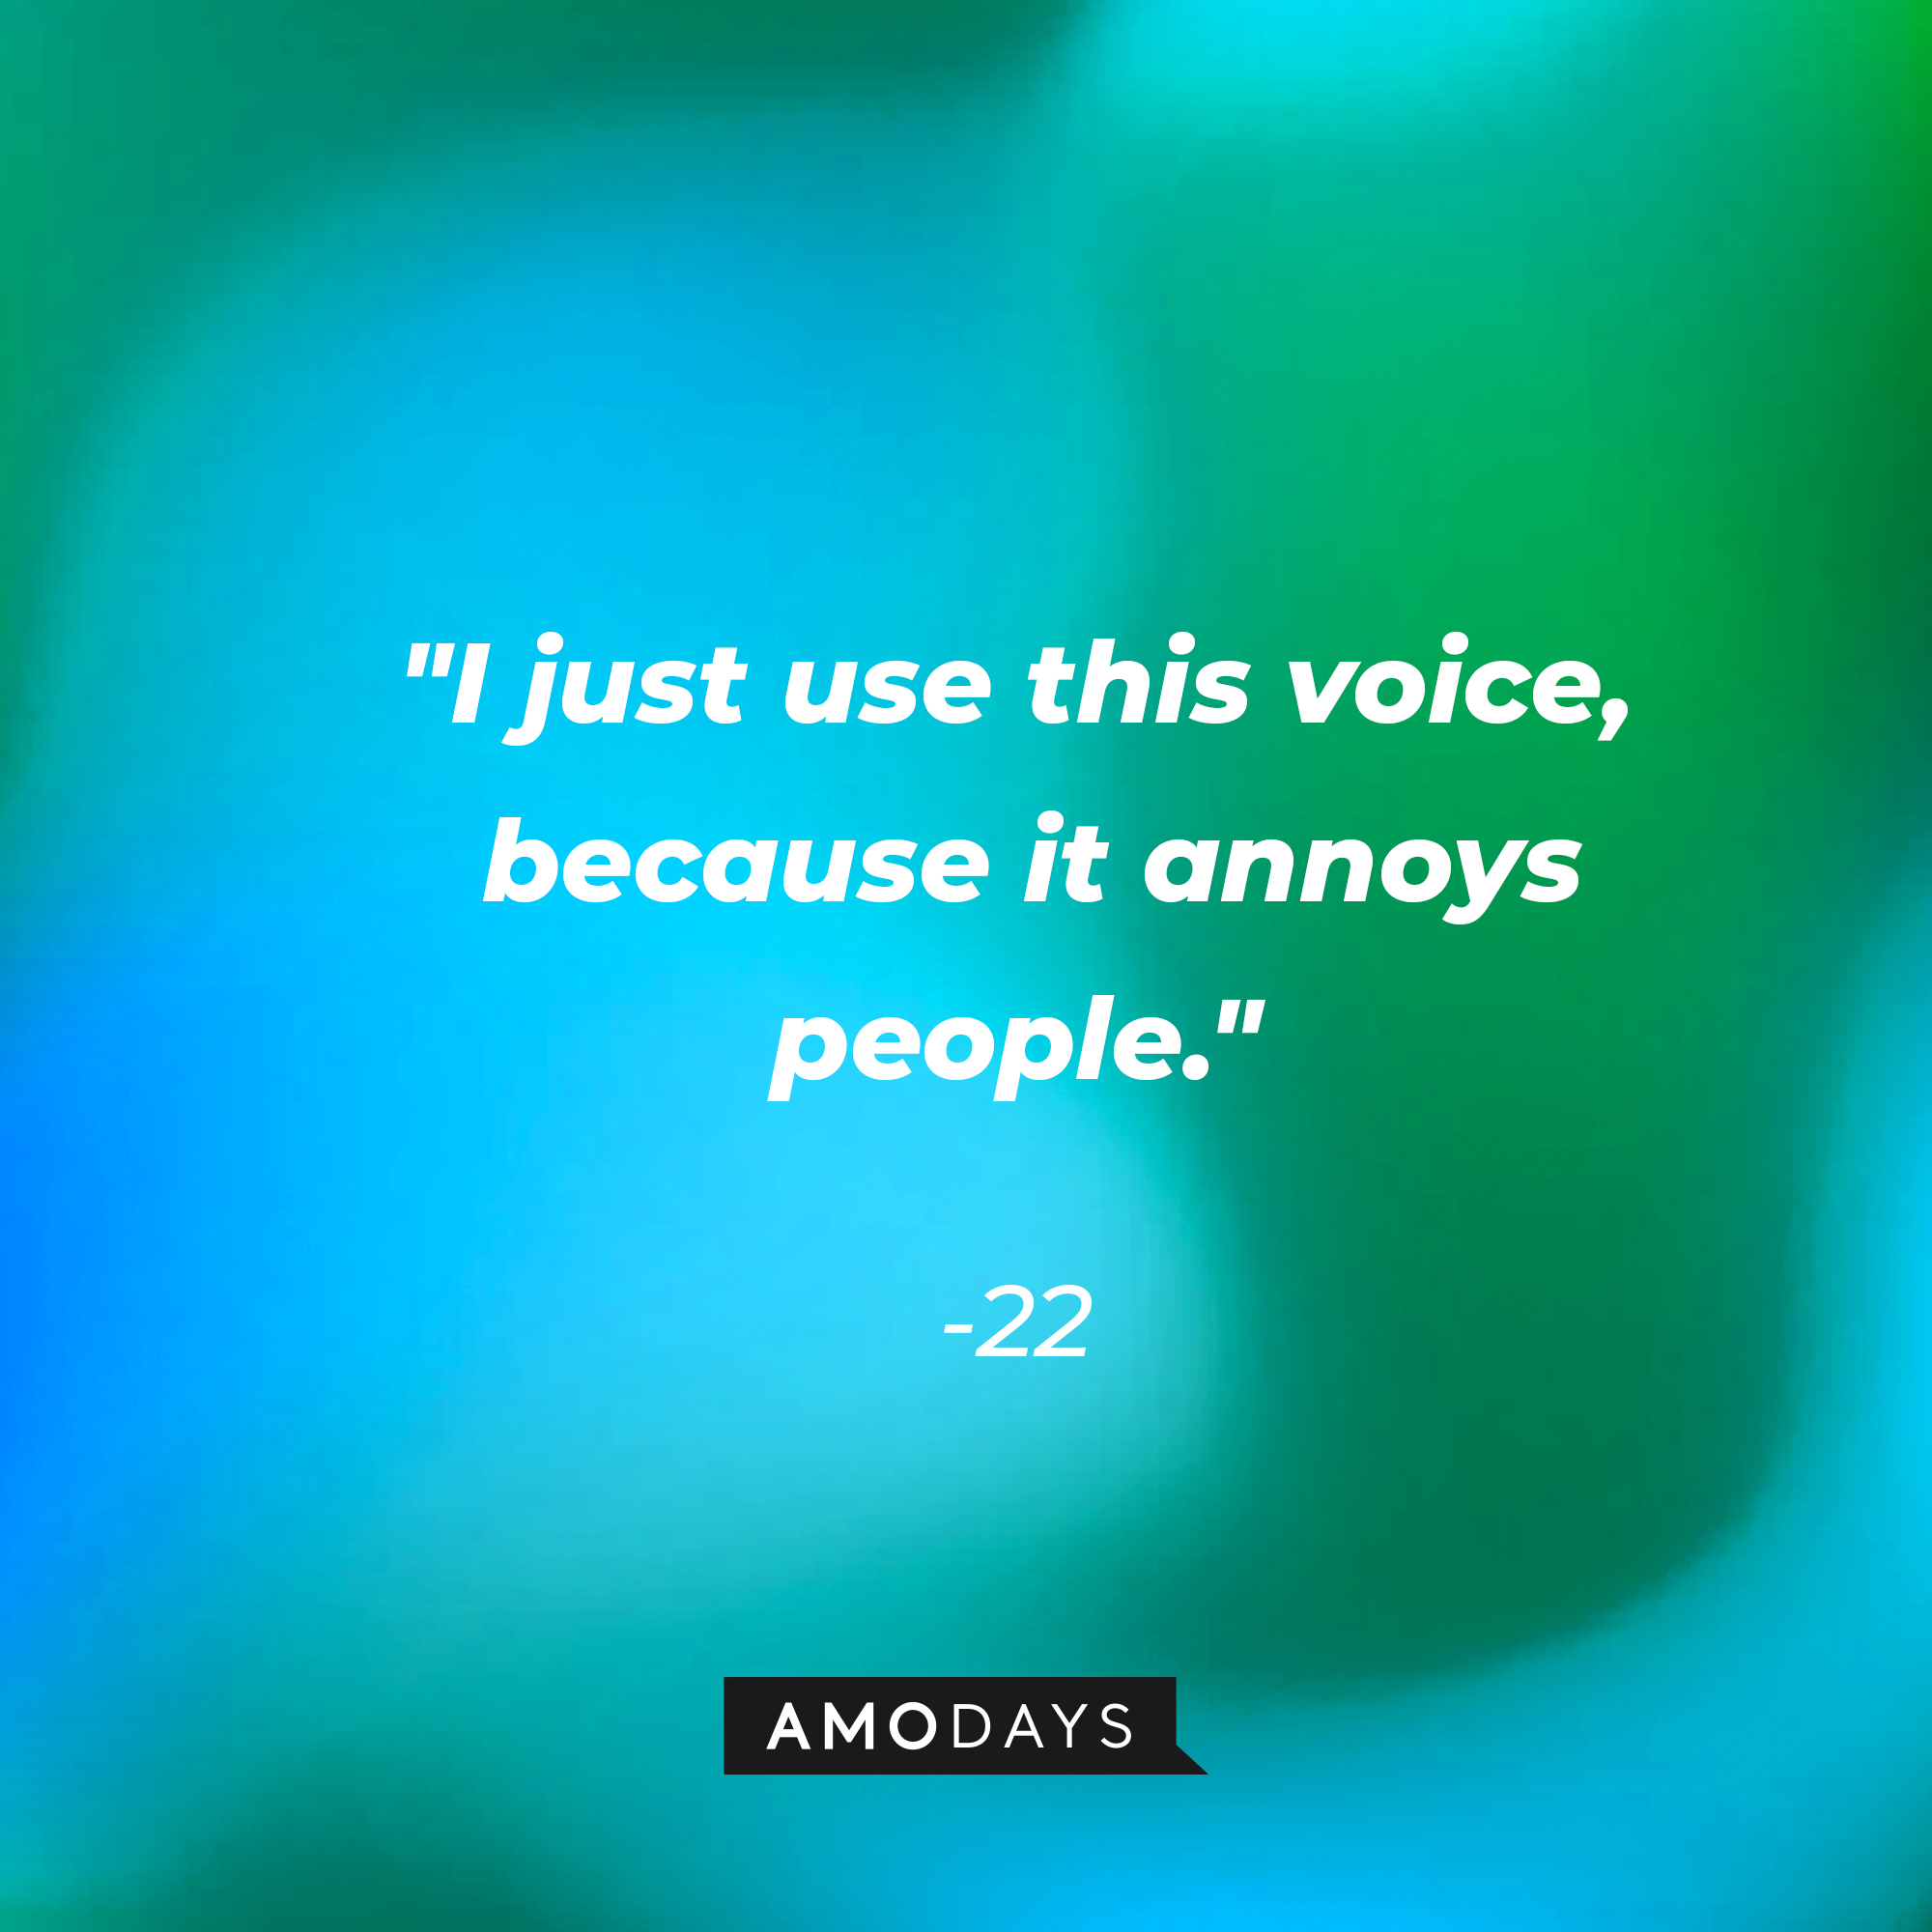 22's quote: "I just use this voice, because it annoys people." | Source: youtube.com/pixar